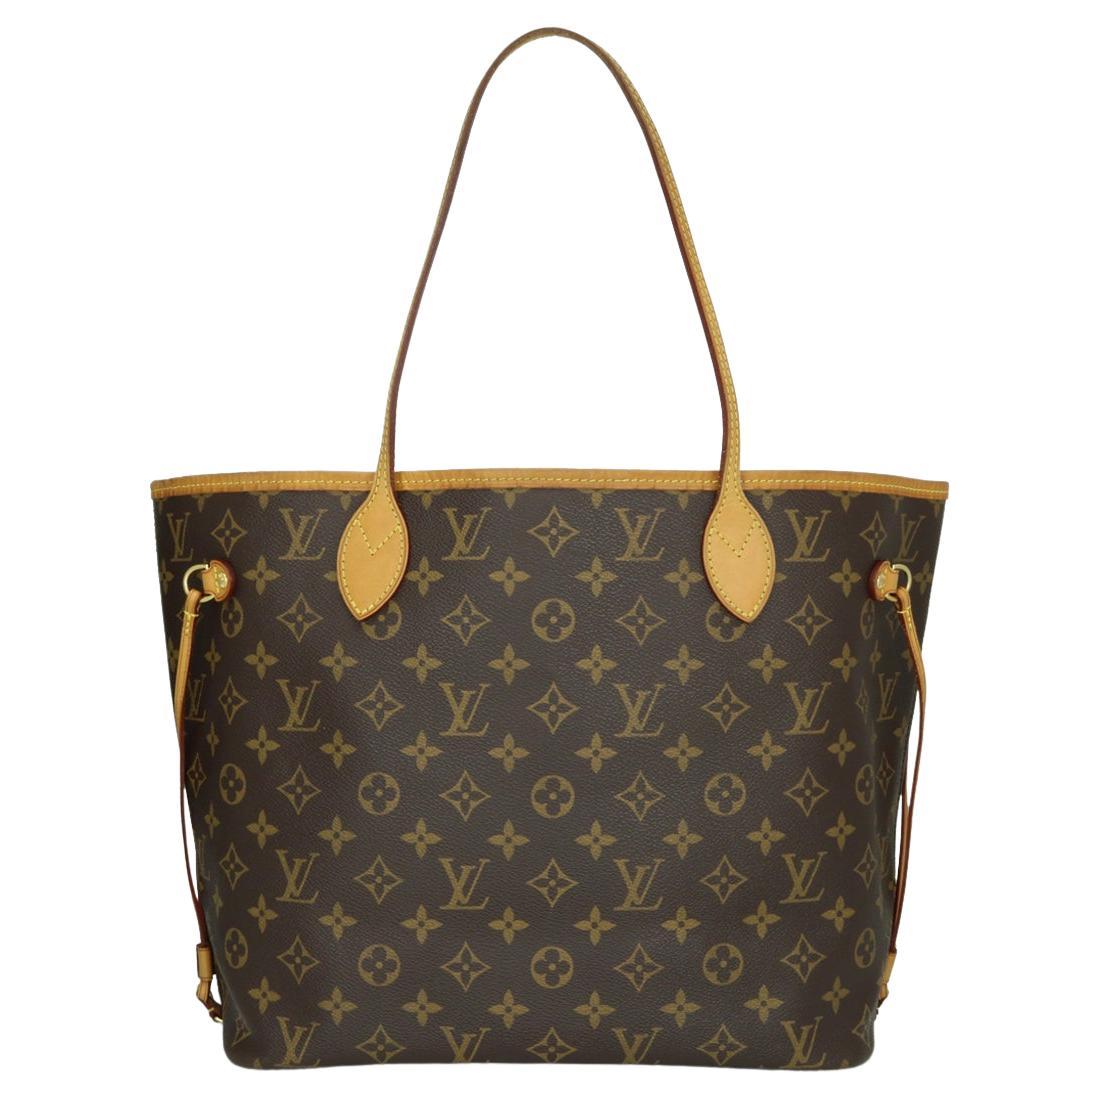 Louis Vuitton Neverfull MM Bag in Monogram with Beige Interior 2014 For Sale